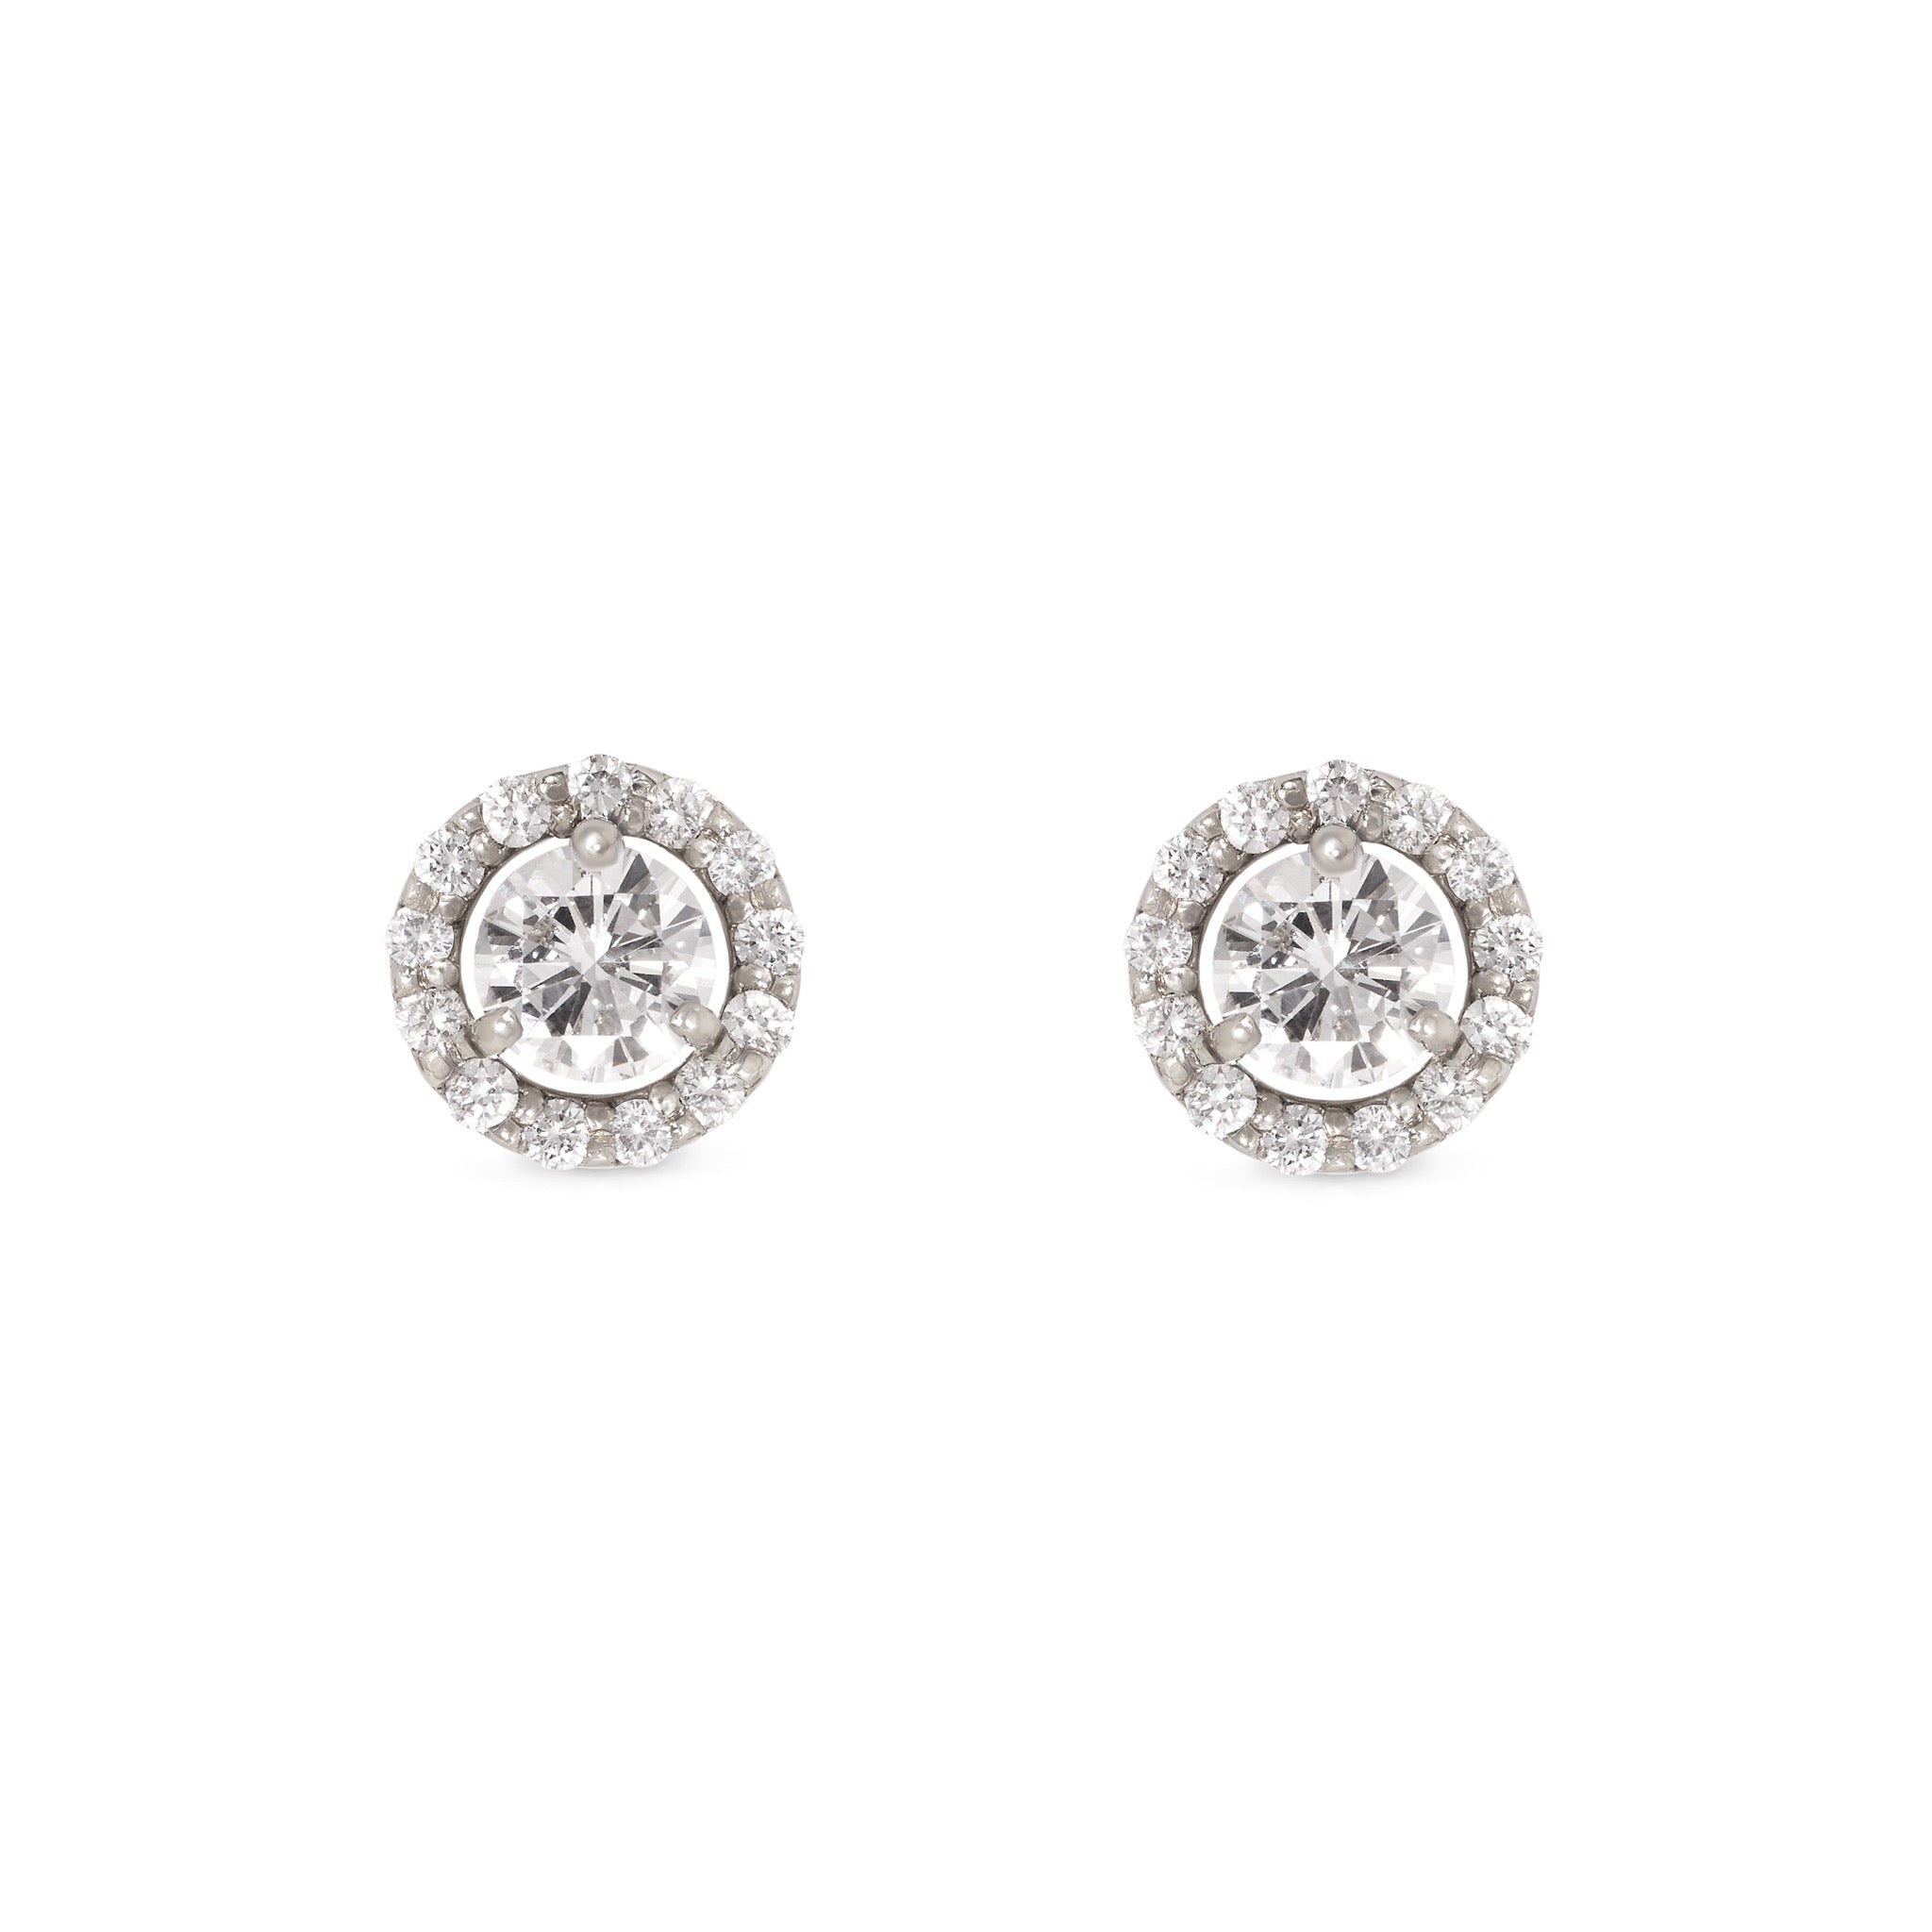 Diamond halo studs set in 14ct white gold lying on white background with shadow